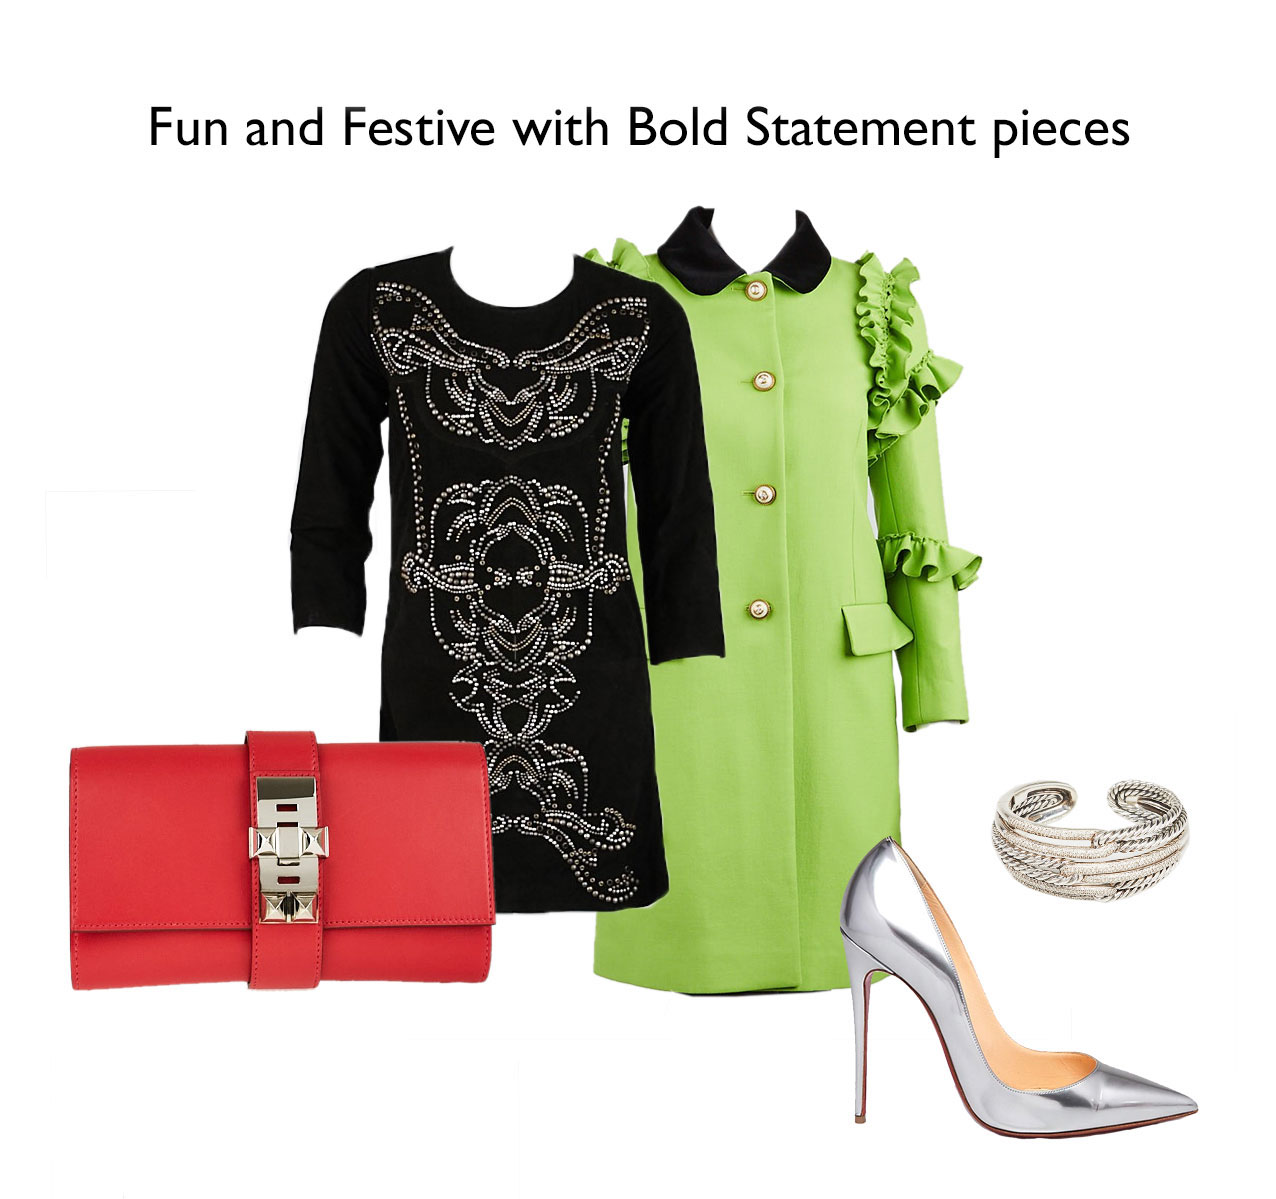 Festive Holiday Party Outfit Idea For Christmas | Yoogi's Closet Authenticated Pre-Owned Luxury yoogsicloset.com